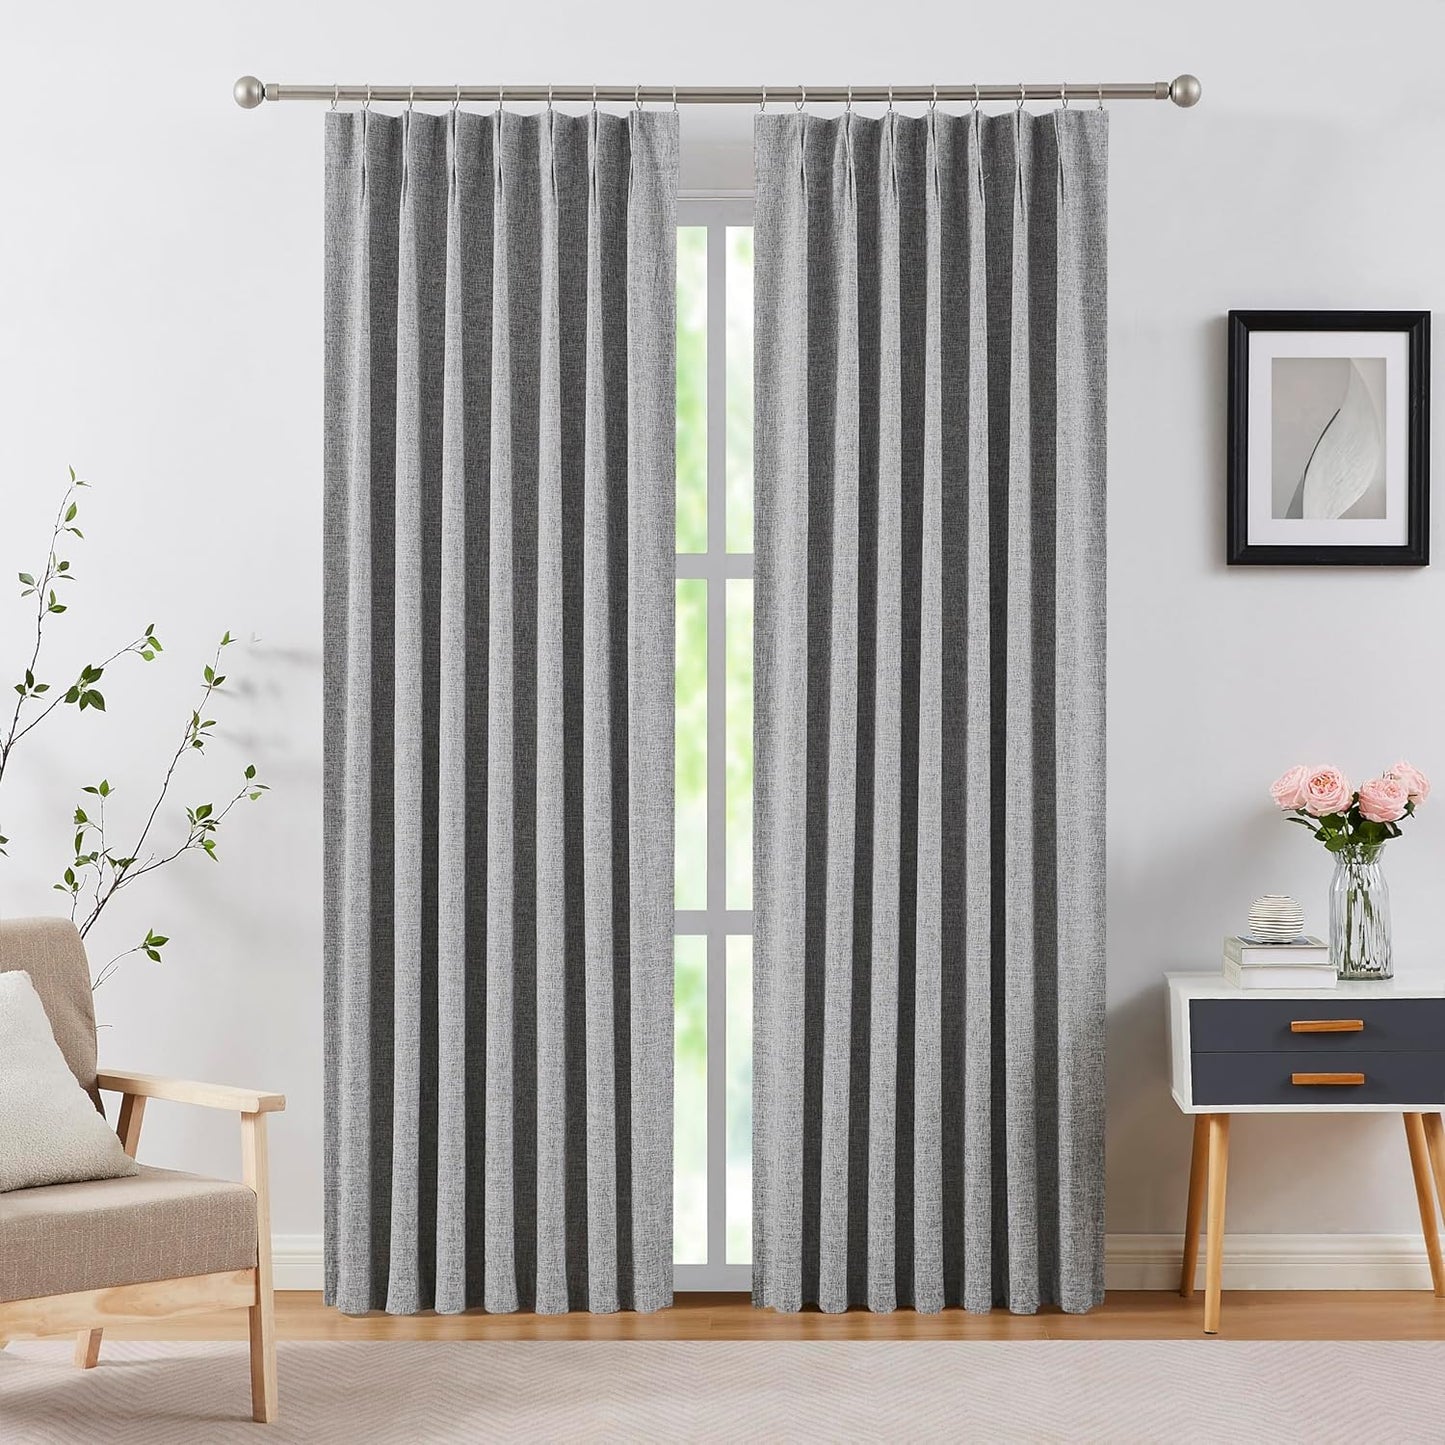 Kayne Studio Blended Linen Pinch Pleat Blackout Curtains 84 Inch Long for Living Room Bedroom,Thermal Insulated Window Treatments Pleated Drapes for Track with 9 Hooks,40"X84",Dark Linen,1 Panel  Kayne Studio Dark Grey 40"X84"X1 